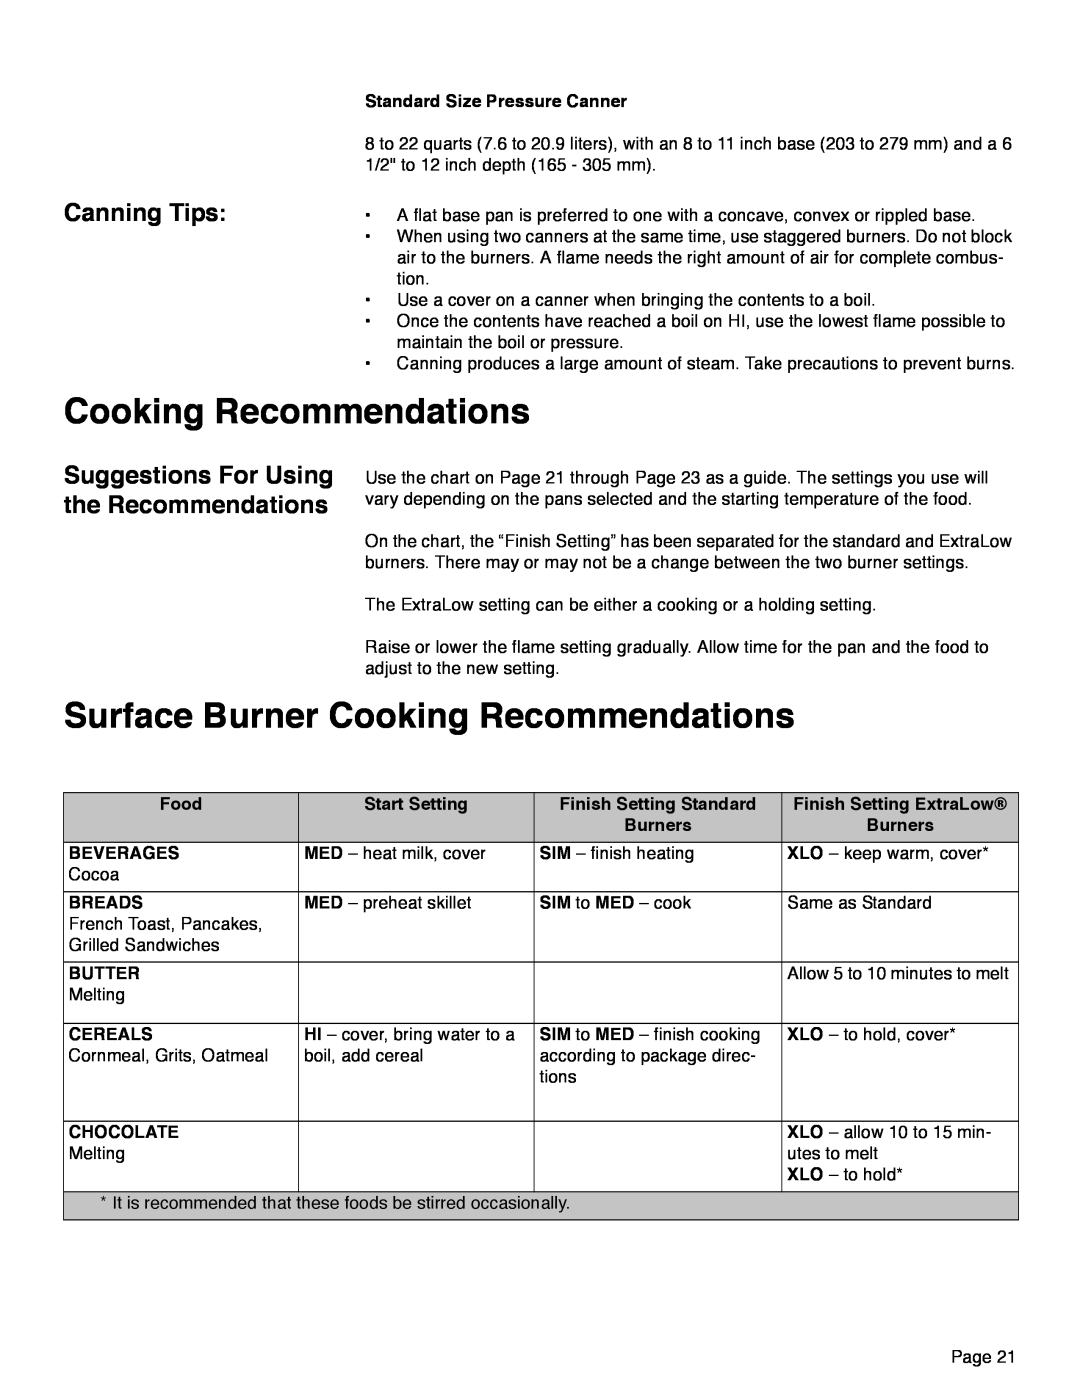 Thermador PRD48, PRD36 Surface Burner Cooking Recommendations, Canning Tips, Suggestions For Using the Recommendations 